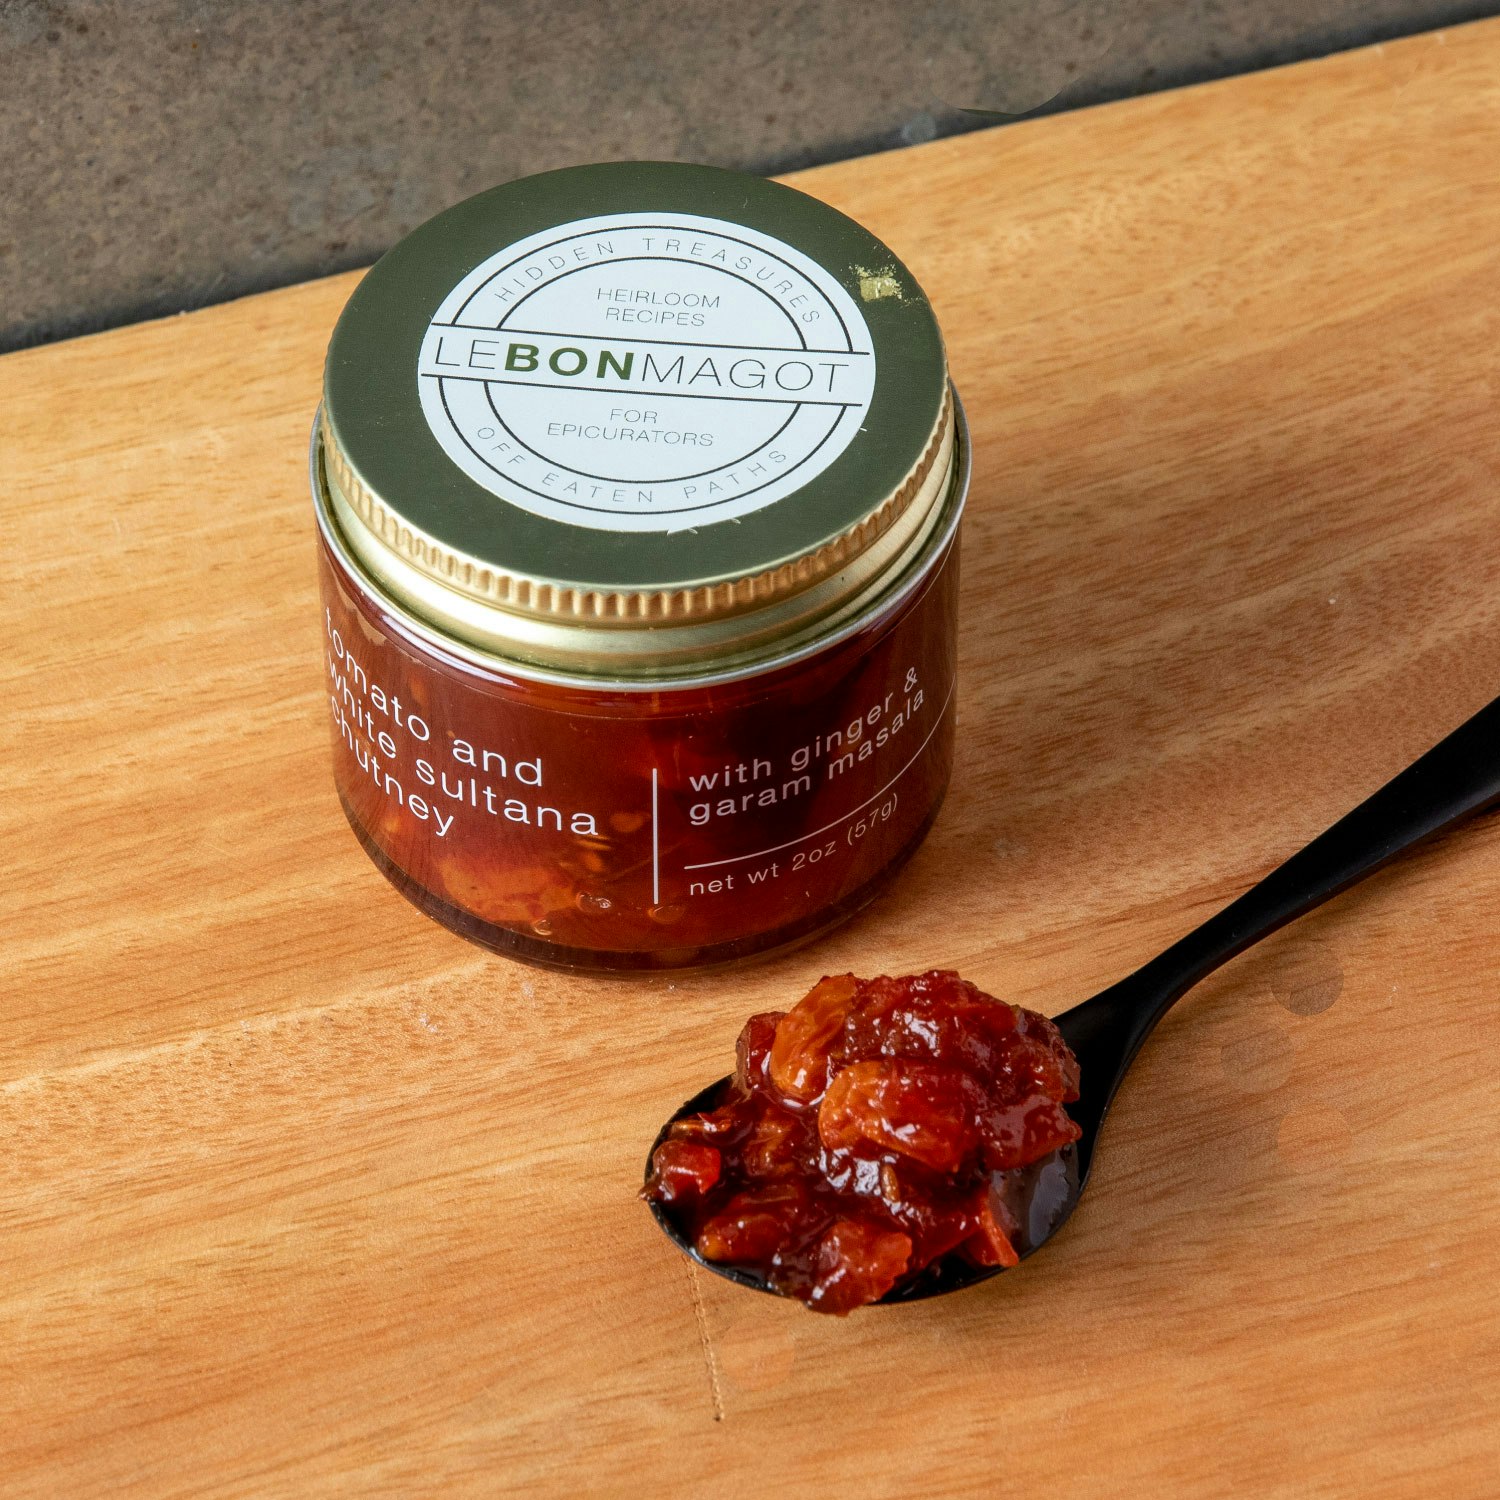 le bon magot tomato and white sultana chutney specialty foods